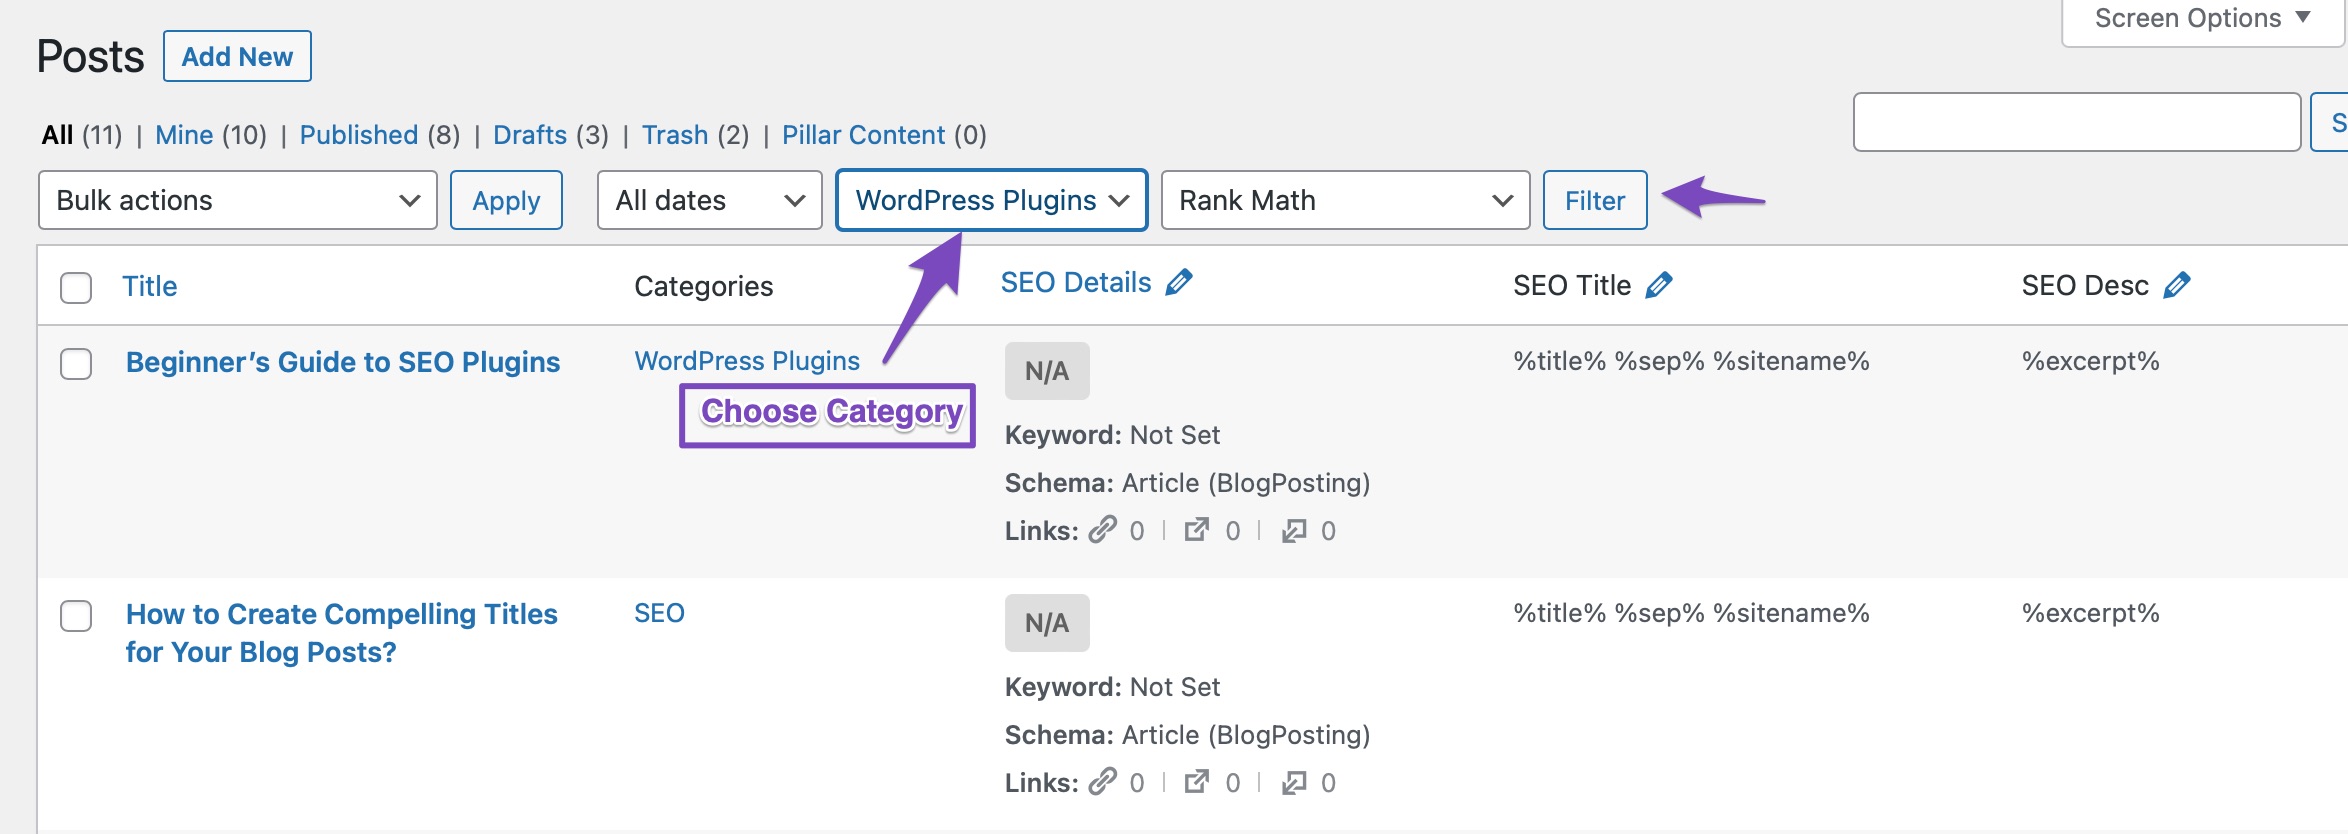 FIlter posts by category in WordPress